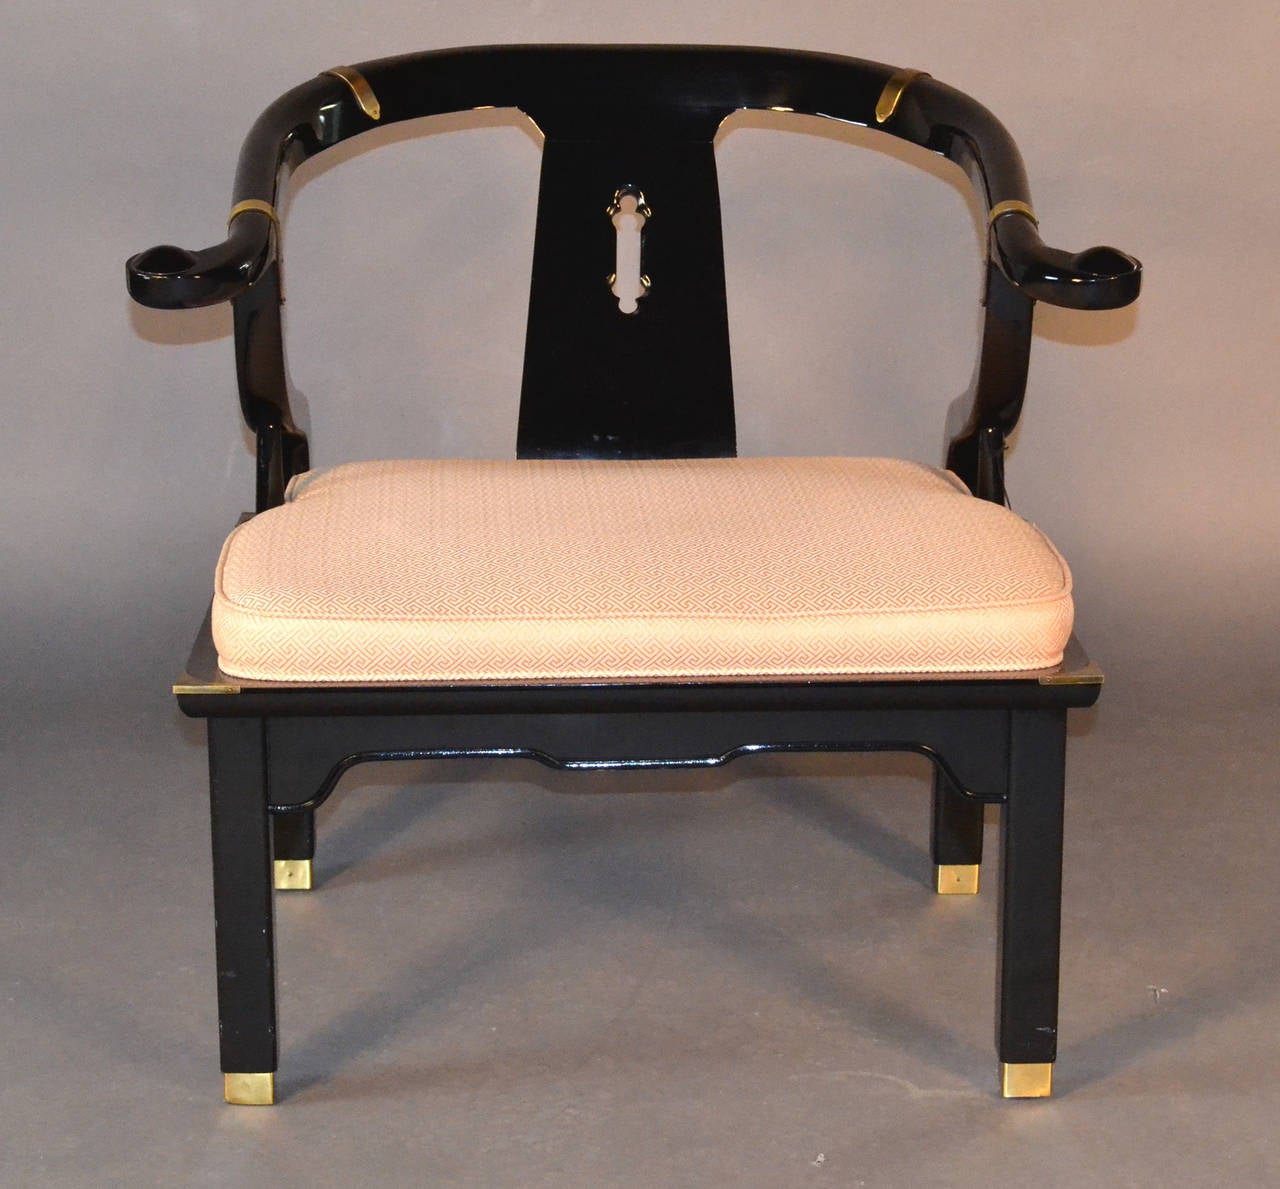 Single black lacquer and linen upholstered attached cushion seat, yoke back chair with tapered legs, brass sabots and brass banding.